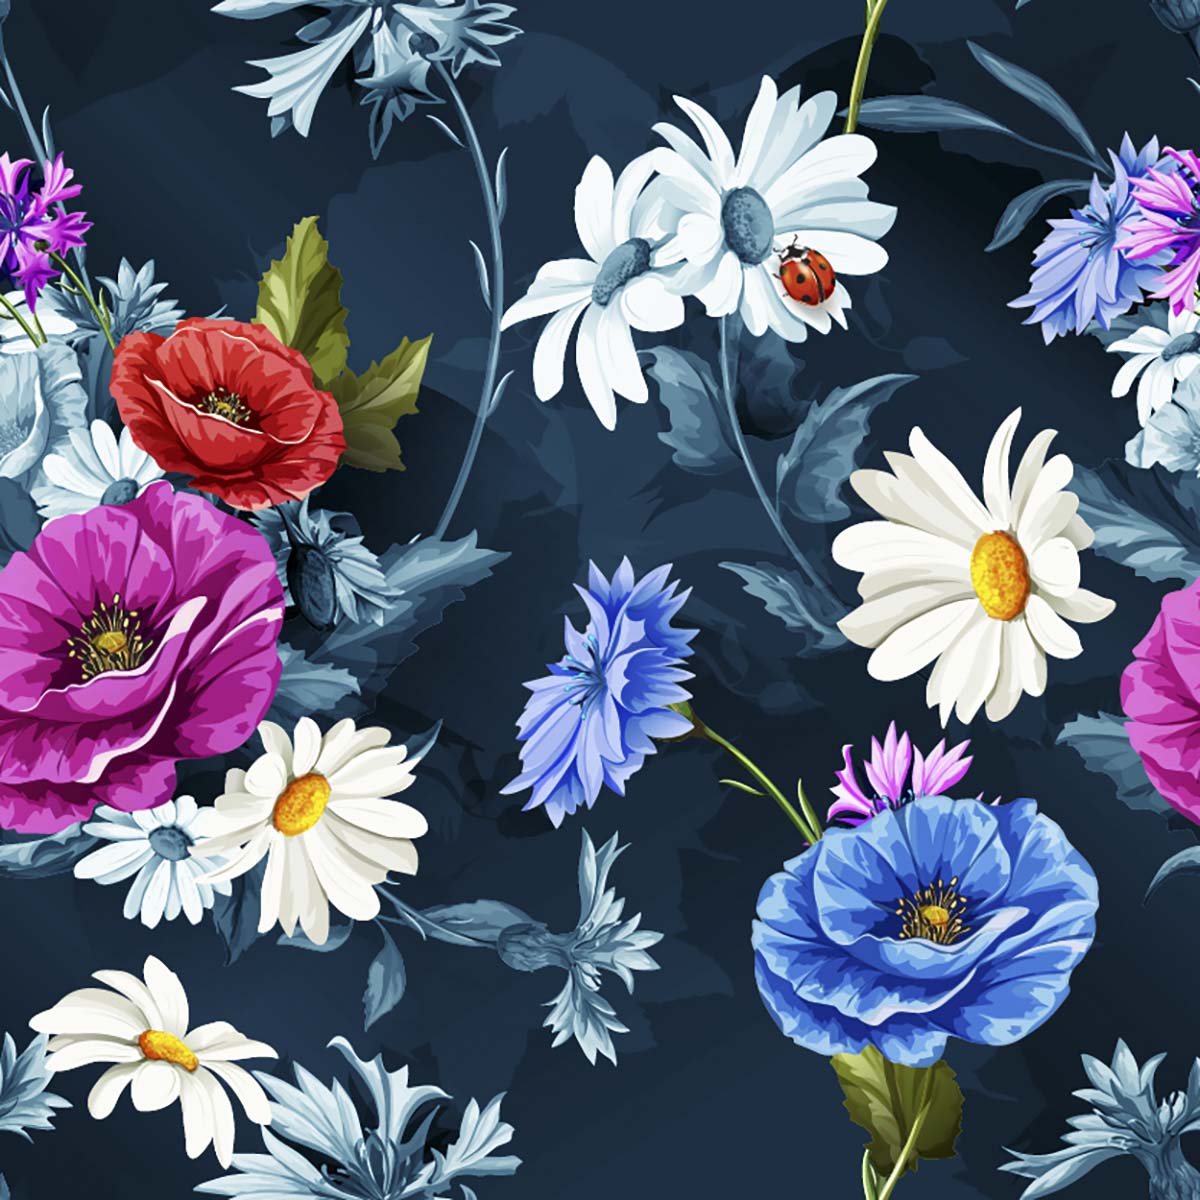 A colorful flowers on a dark background